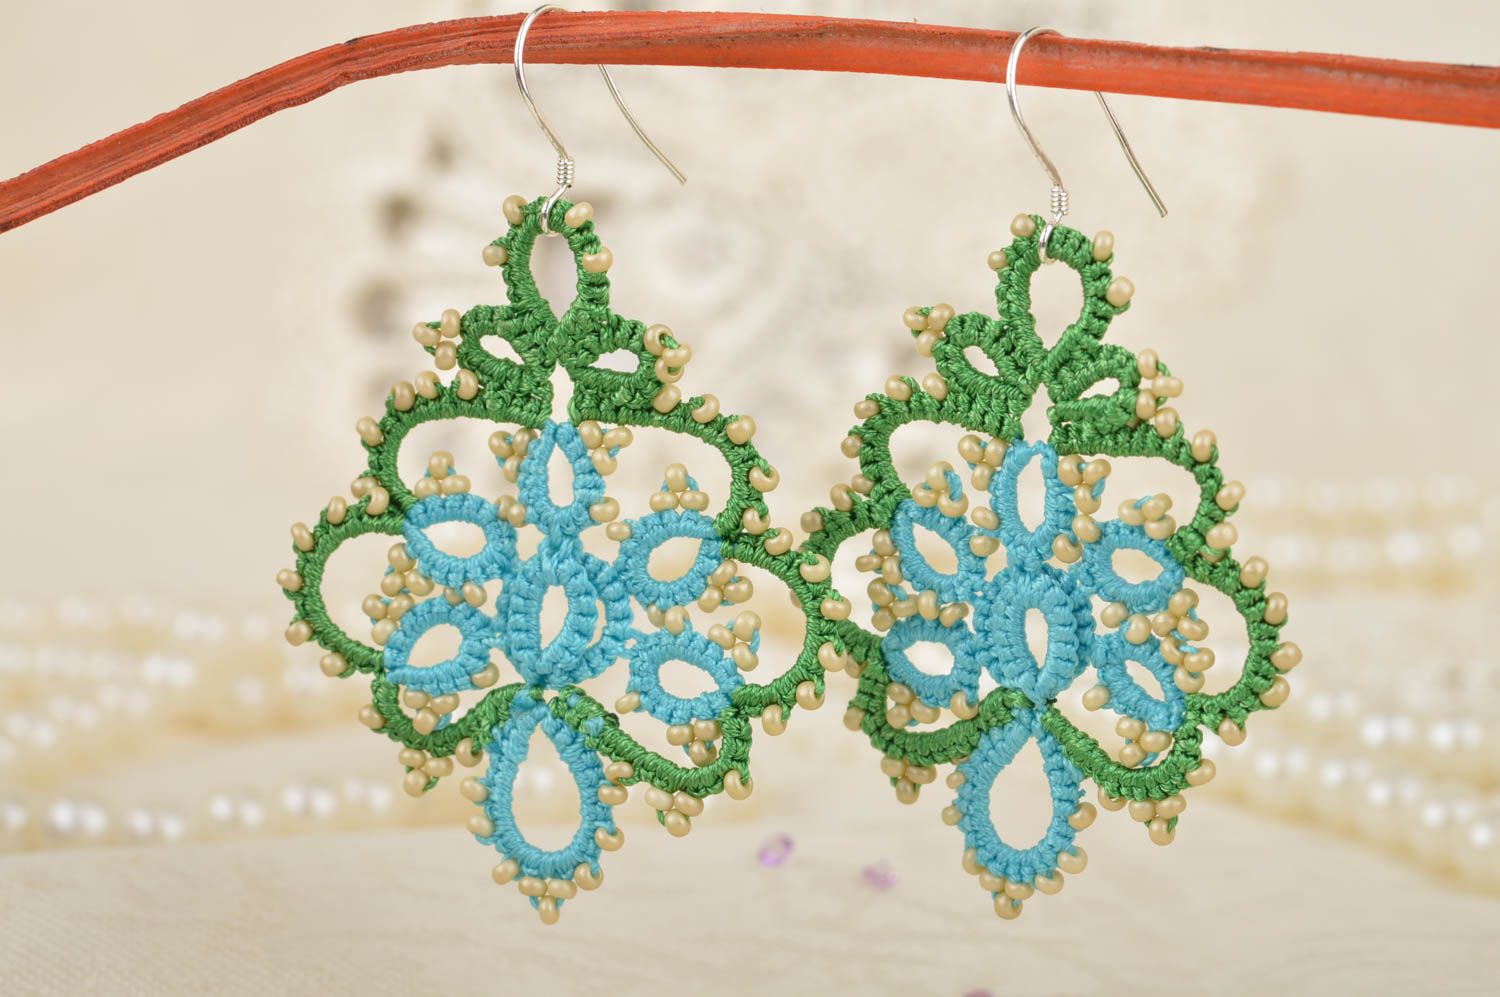 Handmade large lace drop tatted earrings woven of green and blue satin threads photo 3